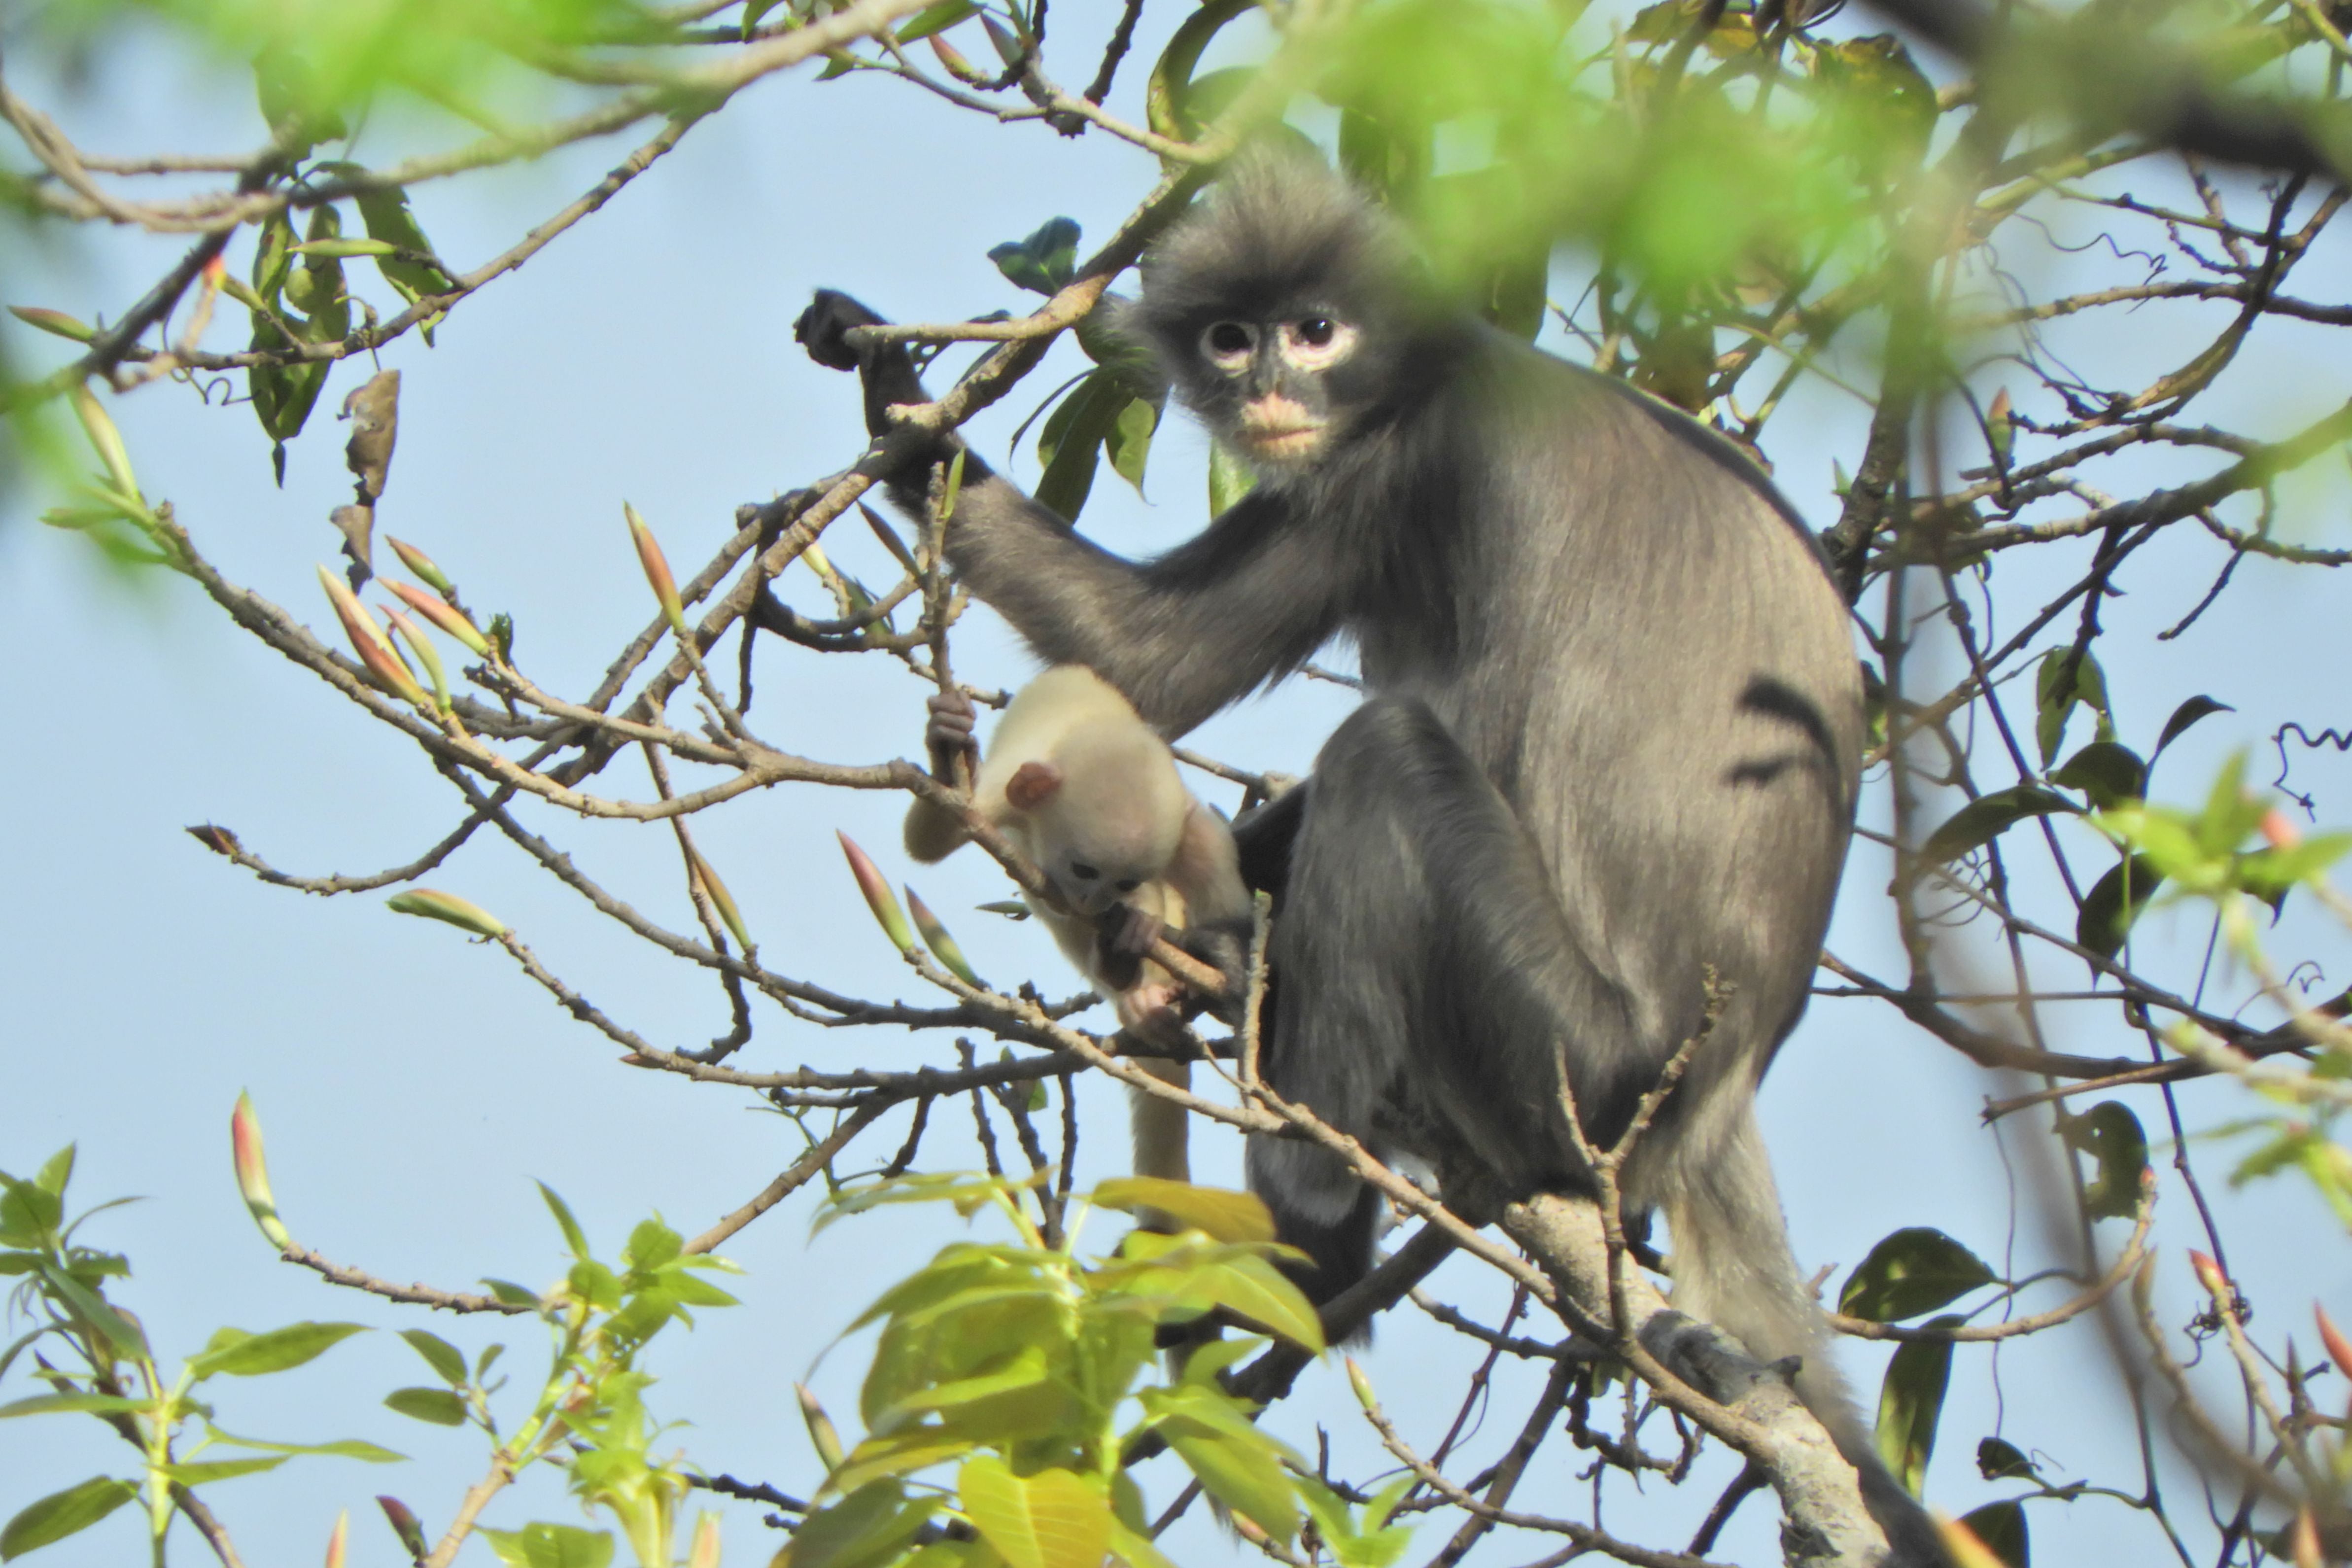 The newly discovered primate named Popa langur (Trachypithecus popa) is seen on a tree branch on Mount Popa, Myanmar